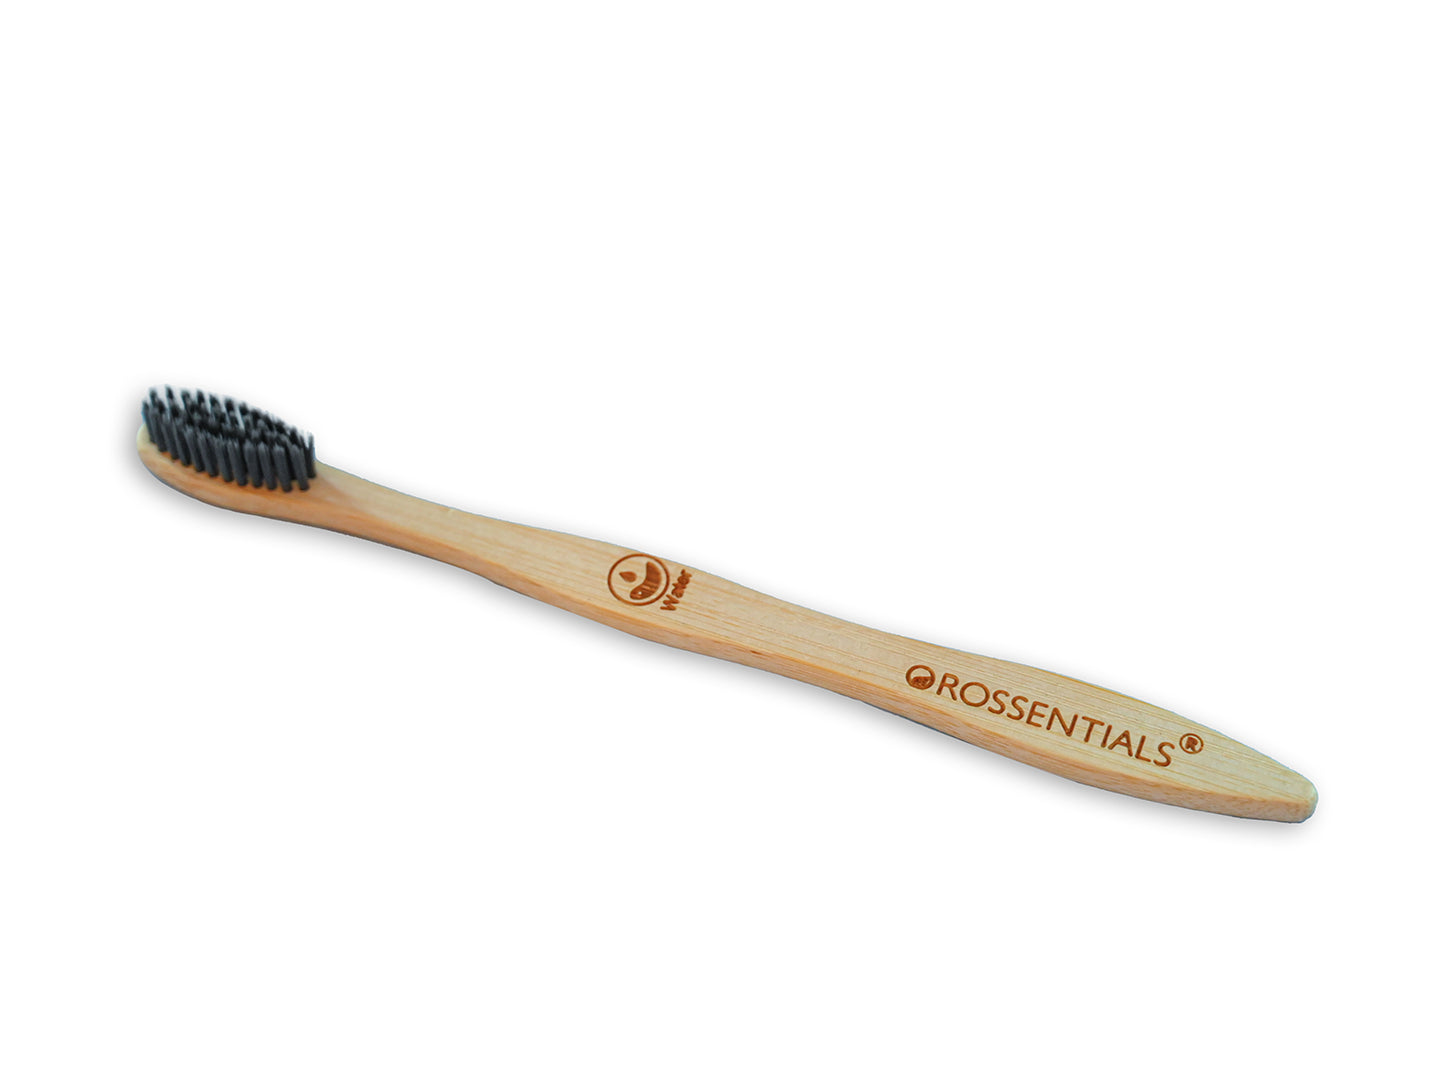 Wooden Toothbrush- Charcoal infused bristles (soft)